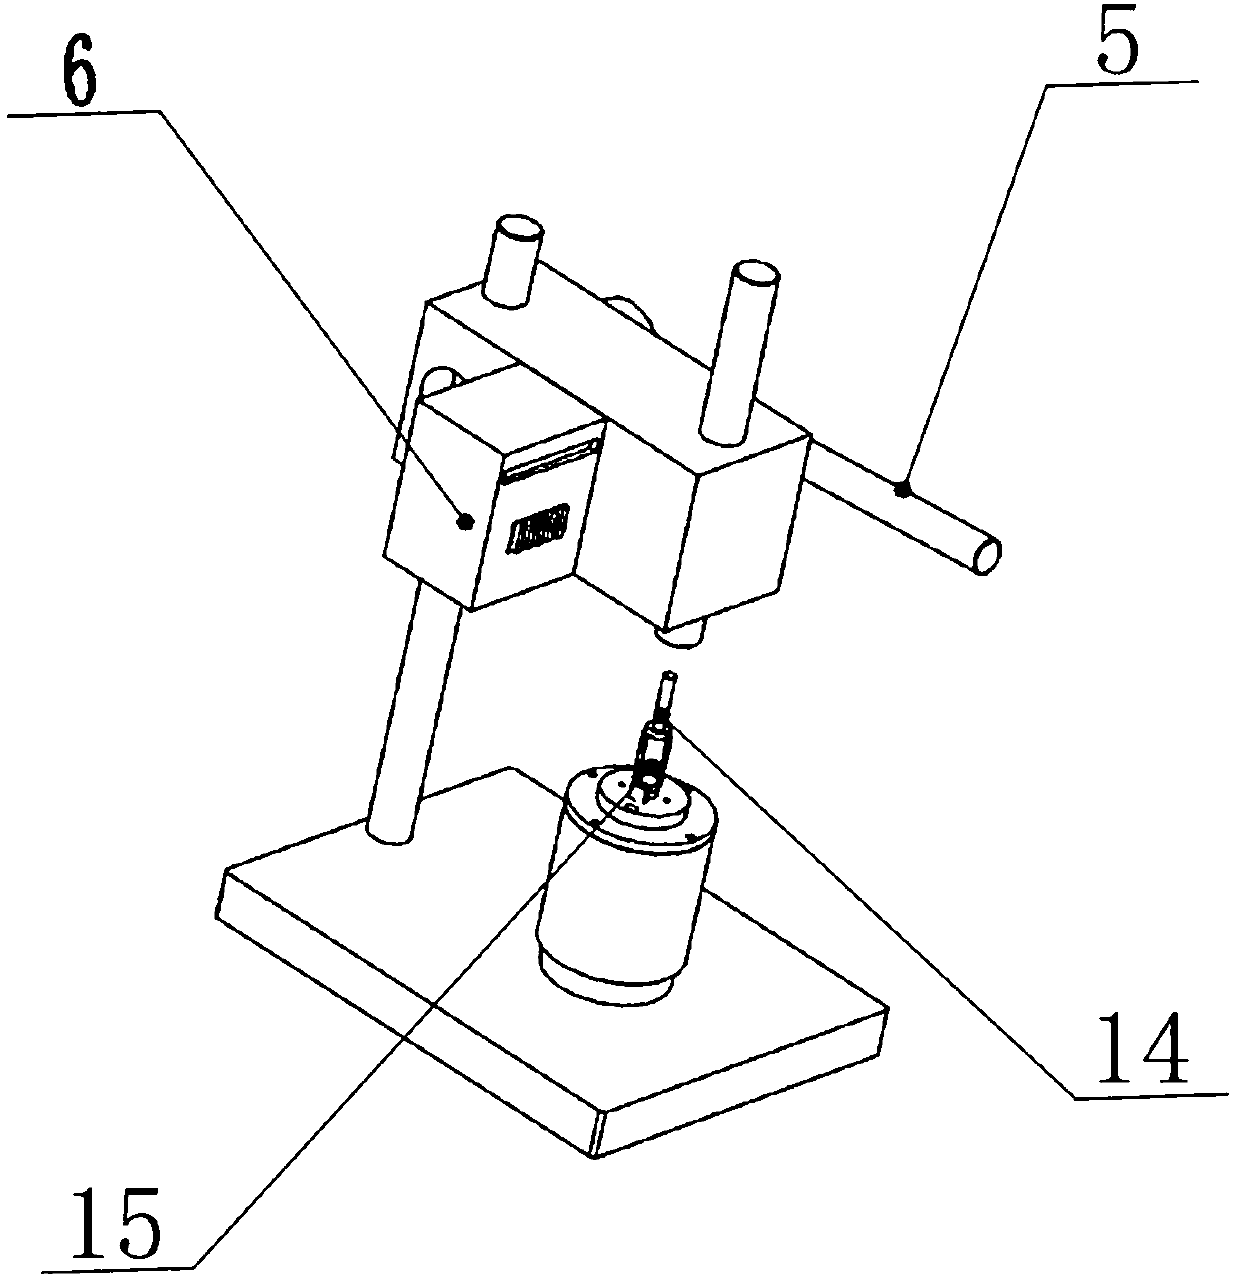 Magnetic steel detection device